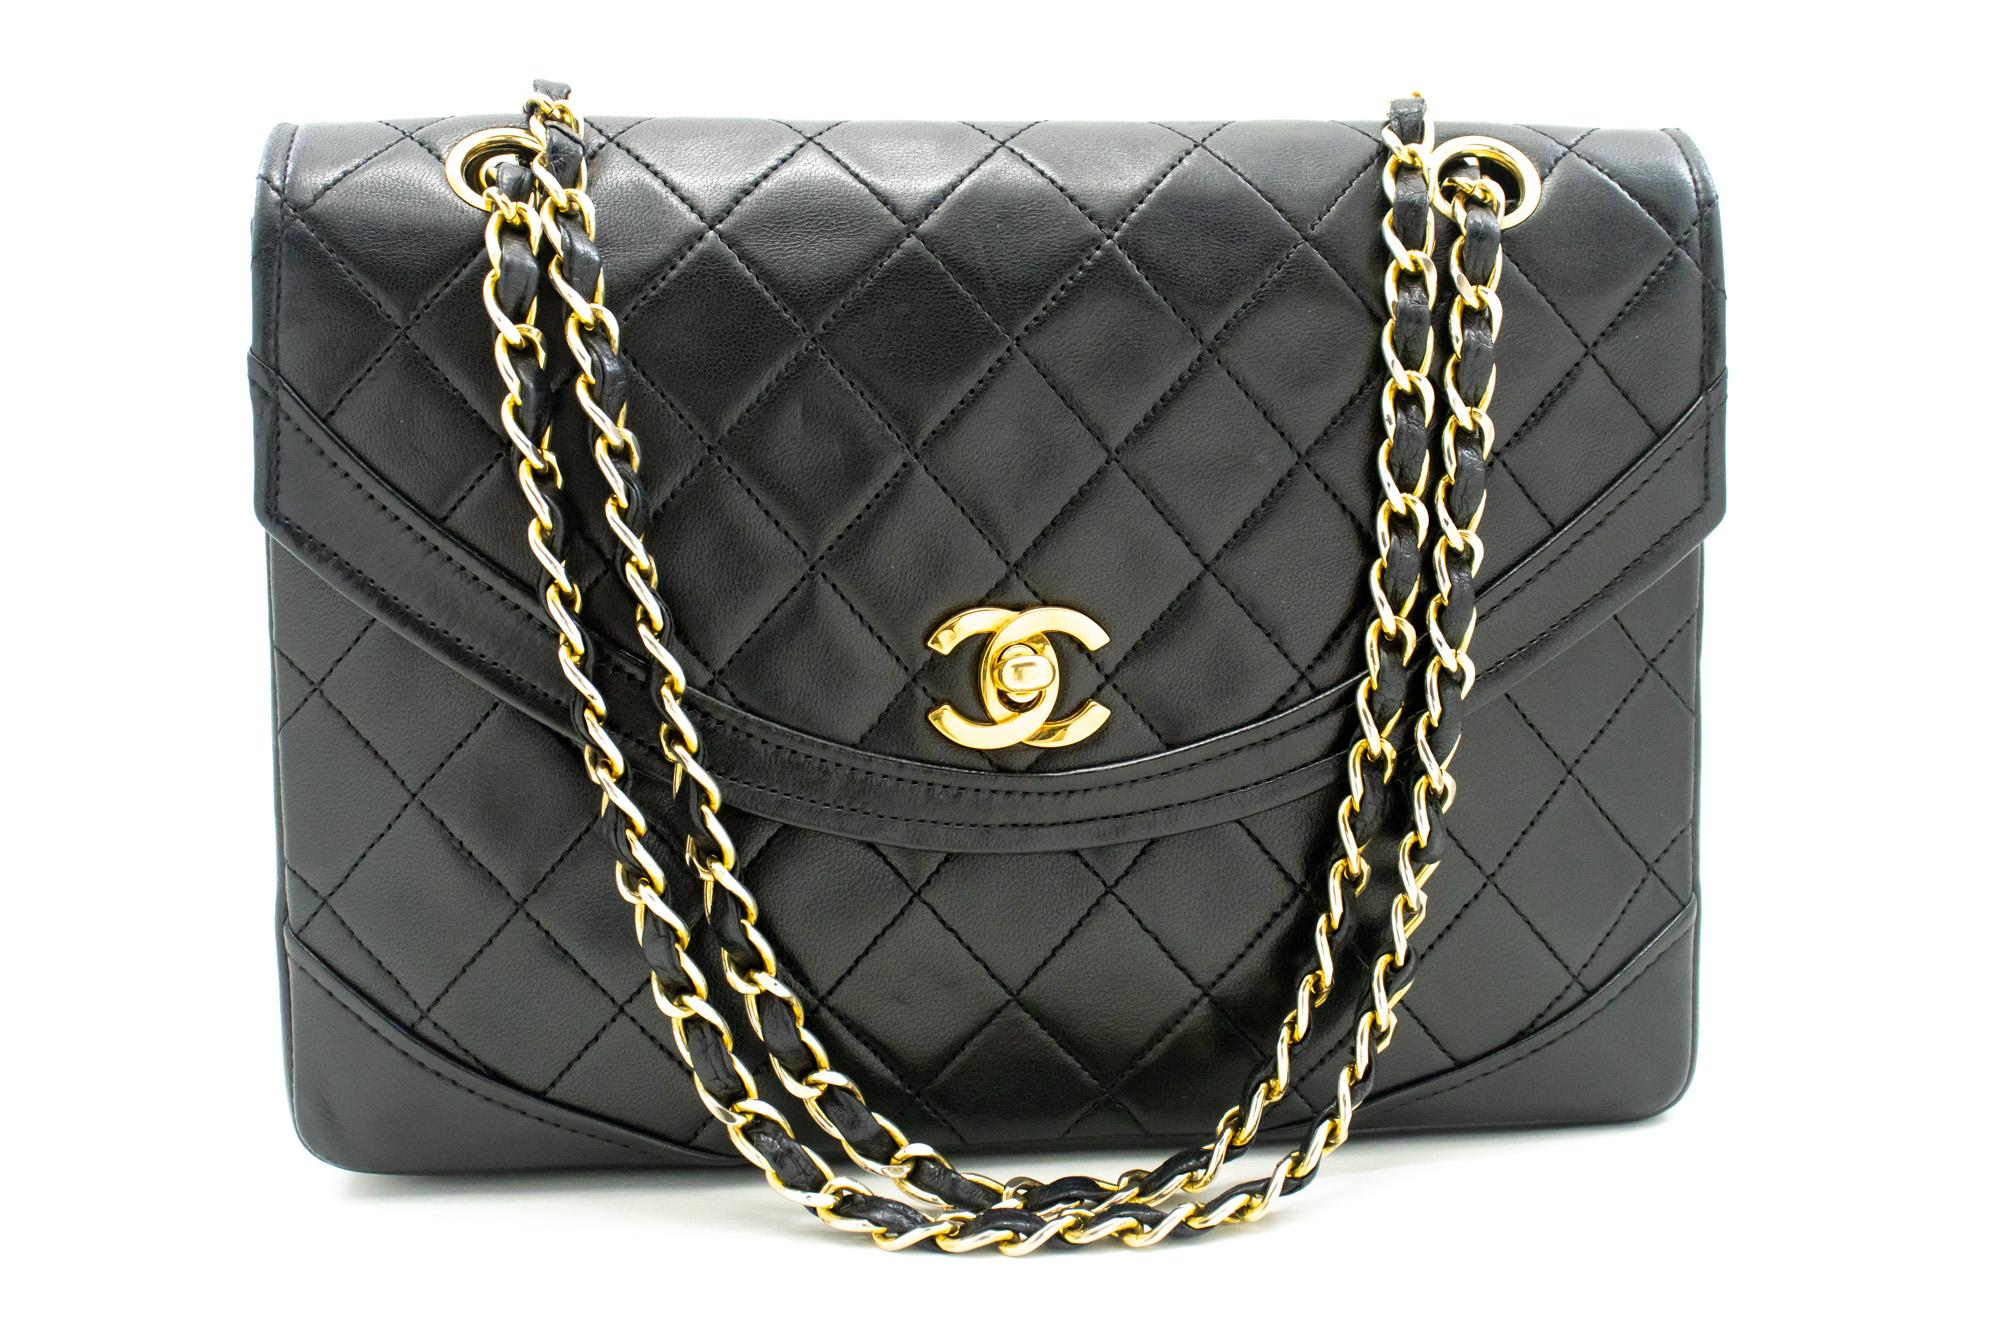 An authentic CHANEL Half Moon Chain Shoulder Bag Crossbody Black Quilted Flap. The color is Black. The outside material is Leather. The pattern is Solid. This item is Vintage / Classic. The year of manufacture would be 1986-1988.
Conditions &